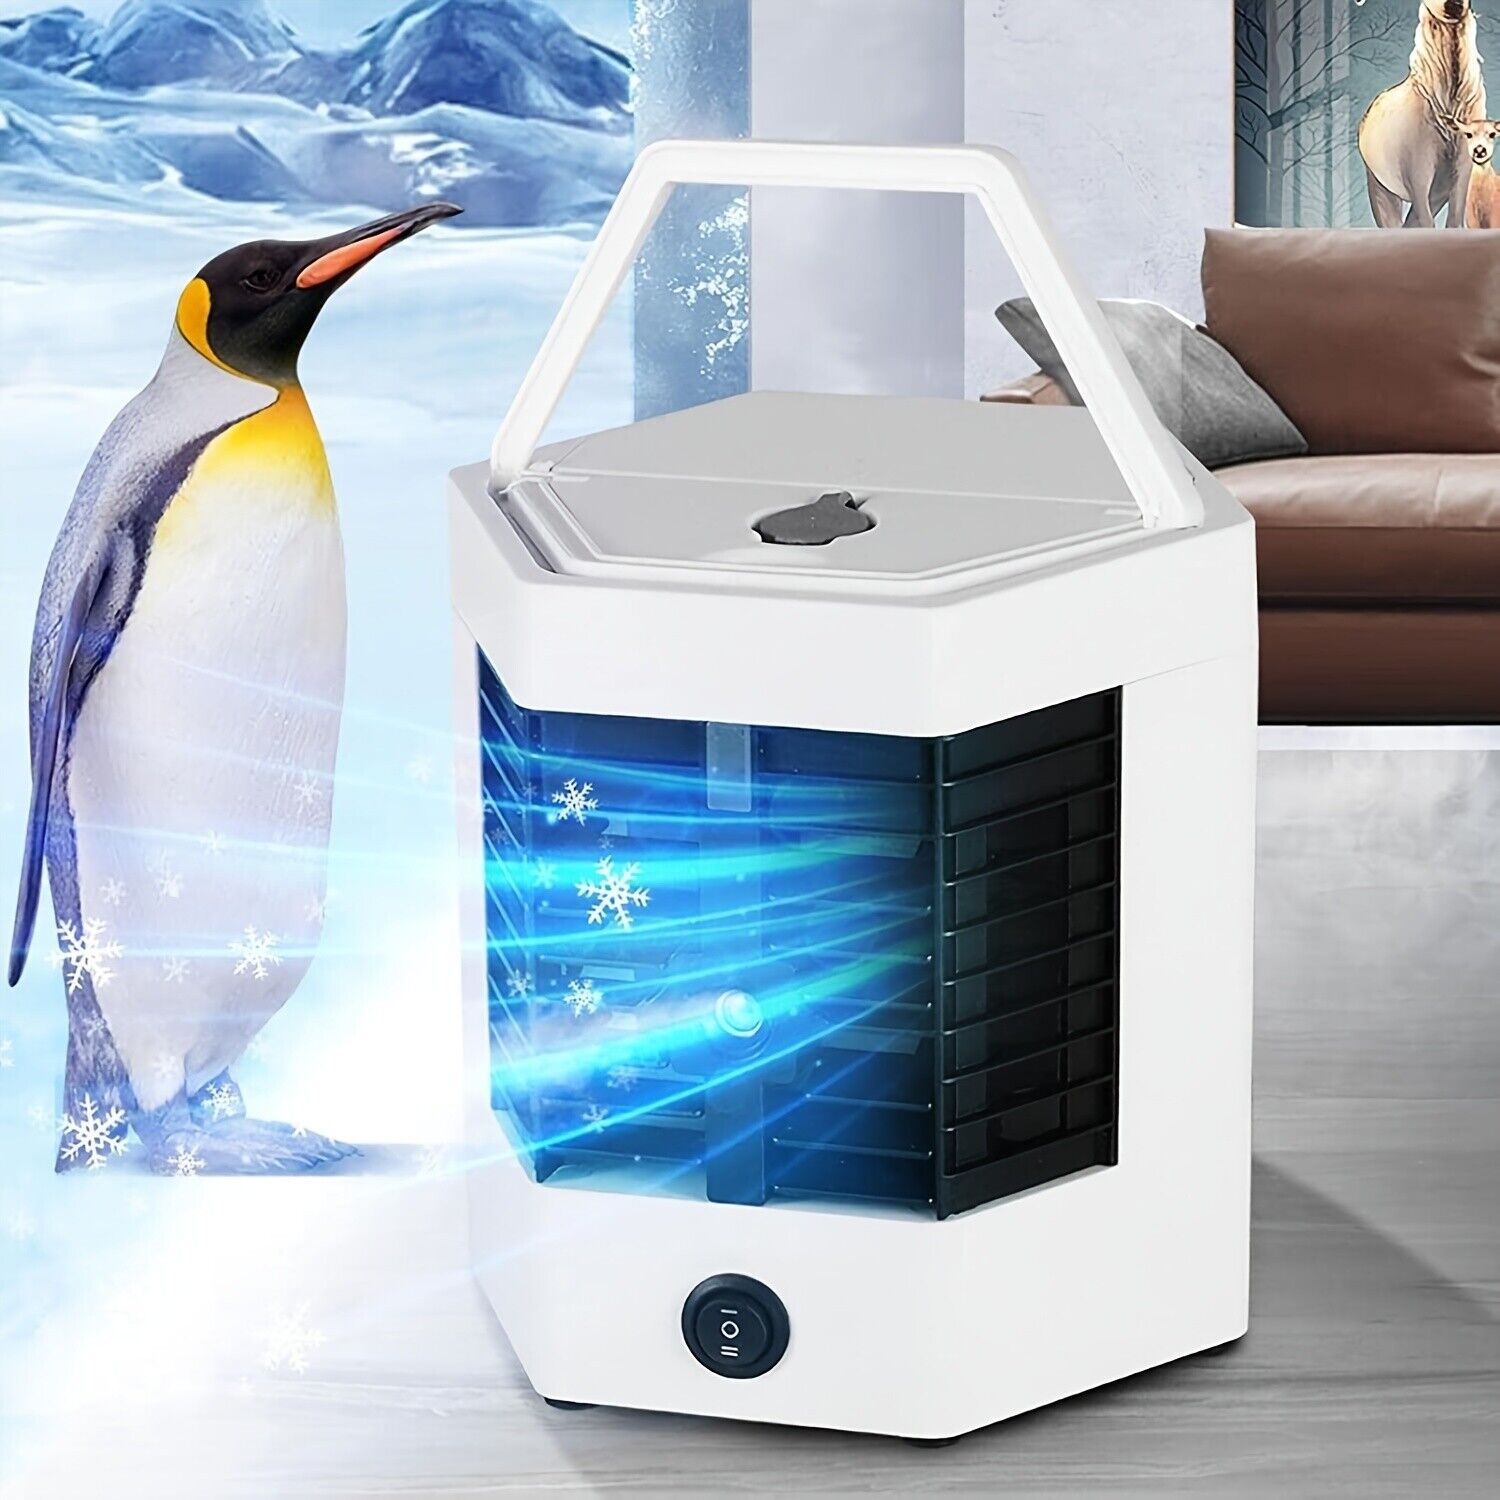 Mini Portable Water-Cooled Air Conditioner Fan - Efficient Cooling & Humidifying